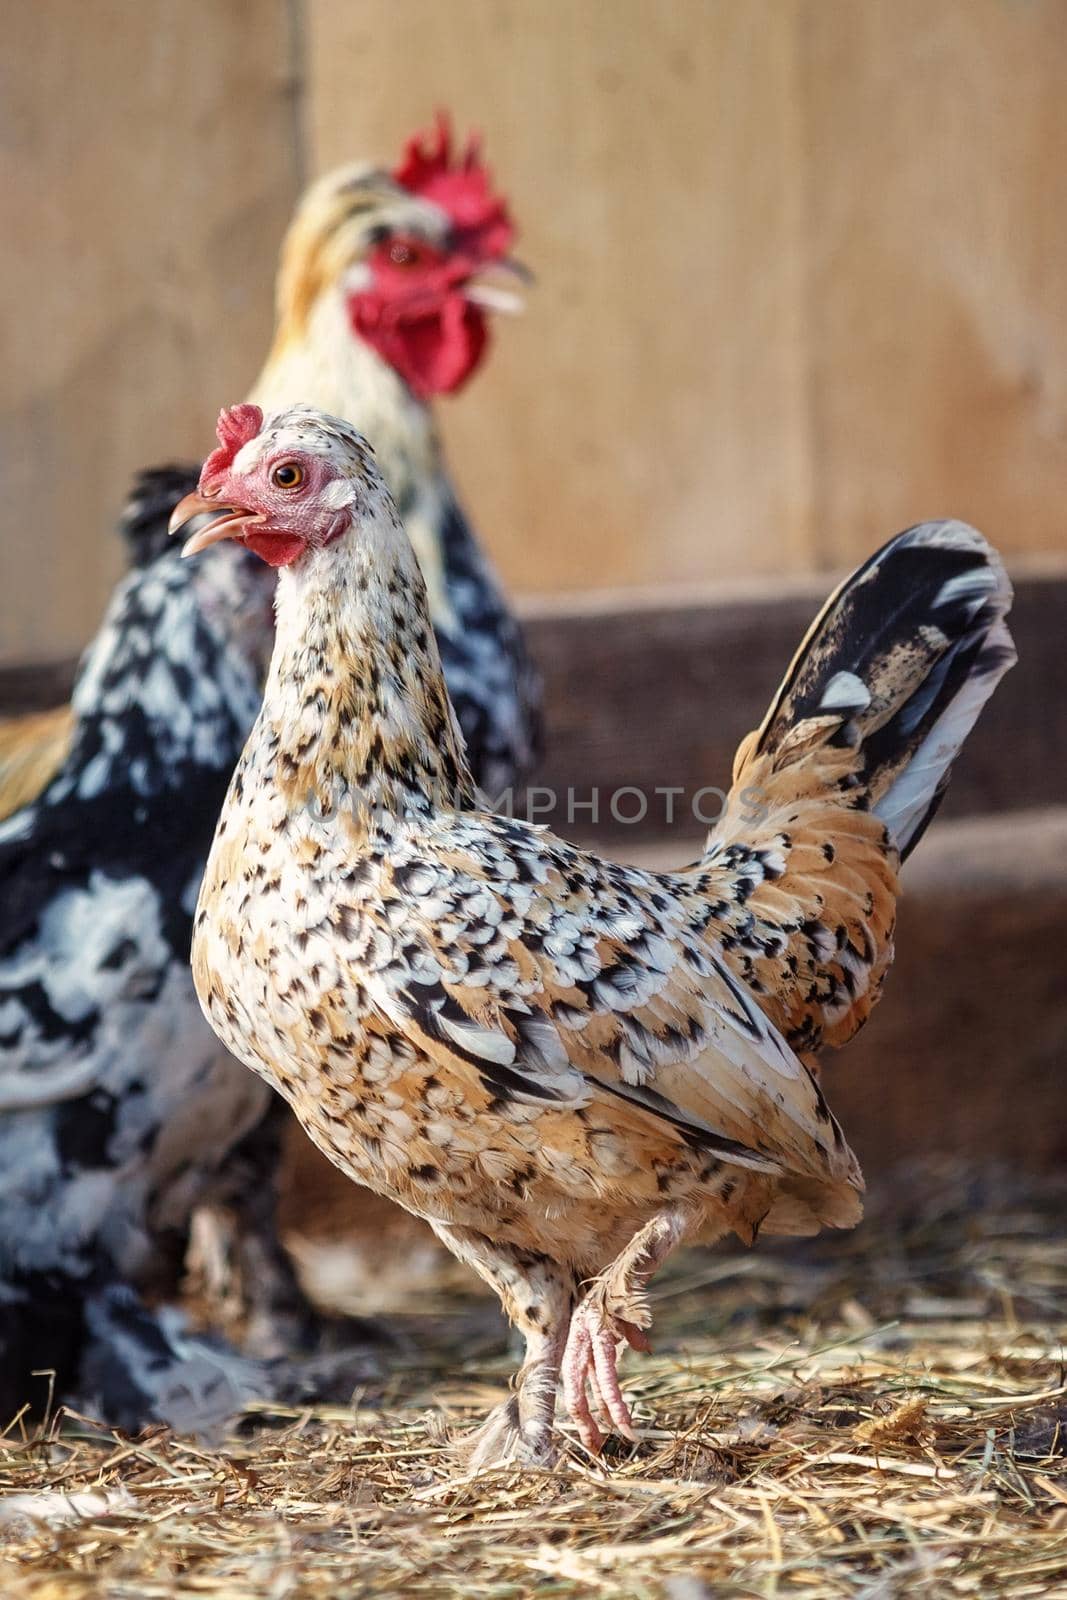 A speckled mini hen in a henhouse, blurred view of rooster in the background